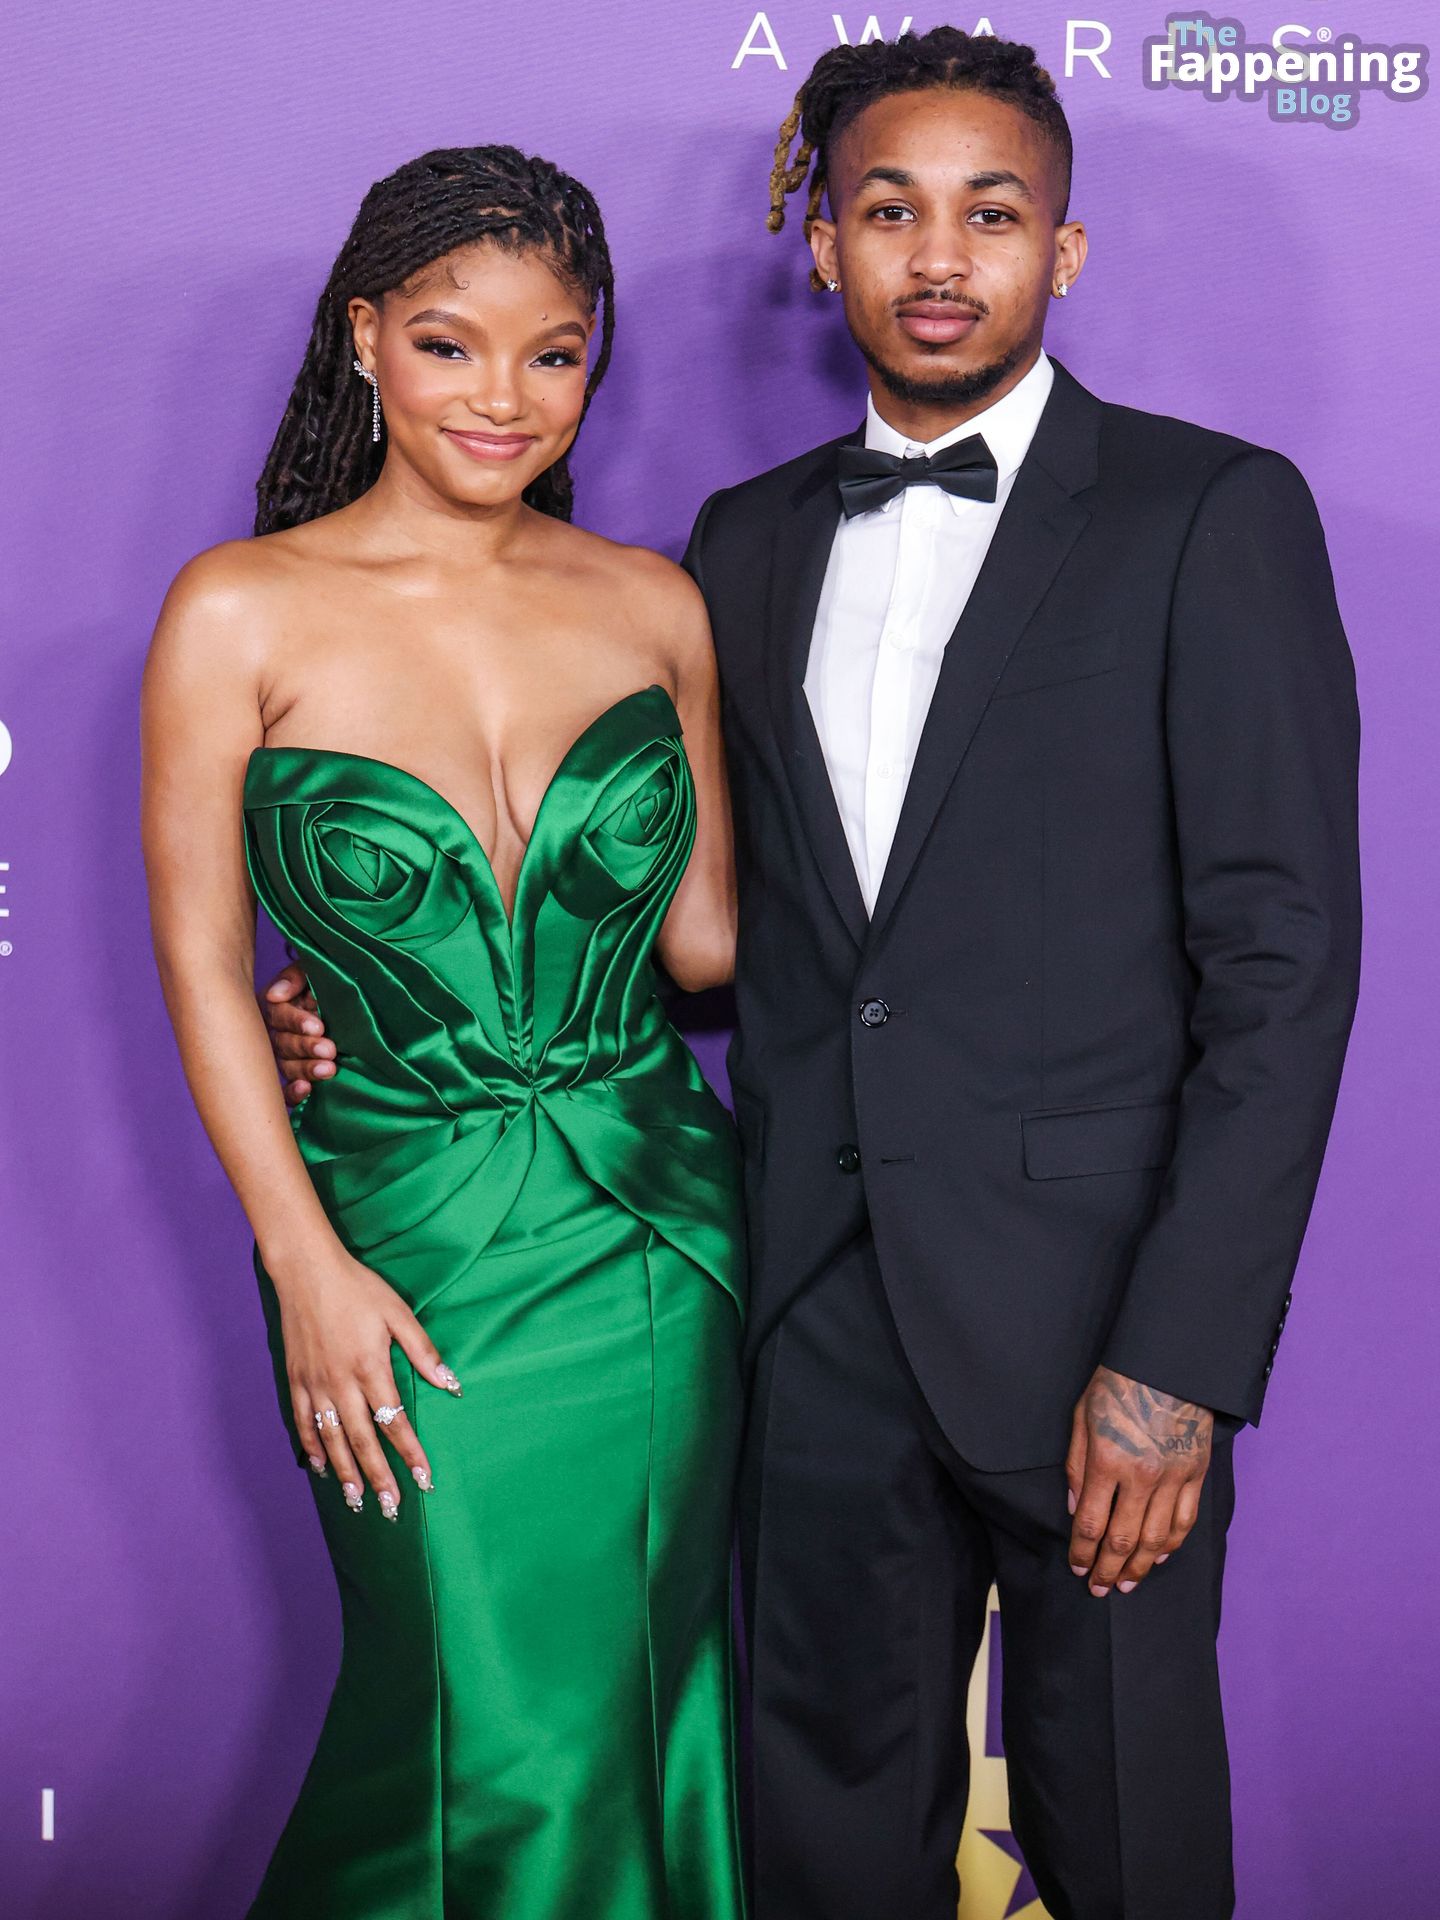 Halle Bailey Displays Her Sexy Boobs at the 55th NAACP Image Awards (62 Photos)